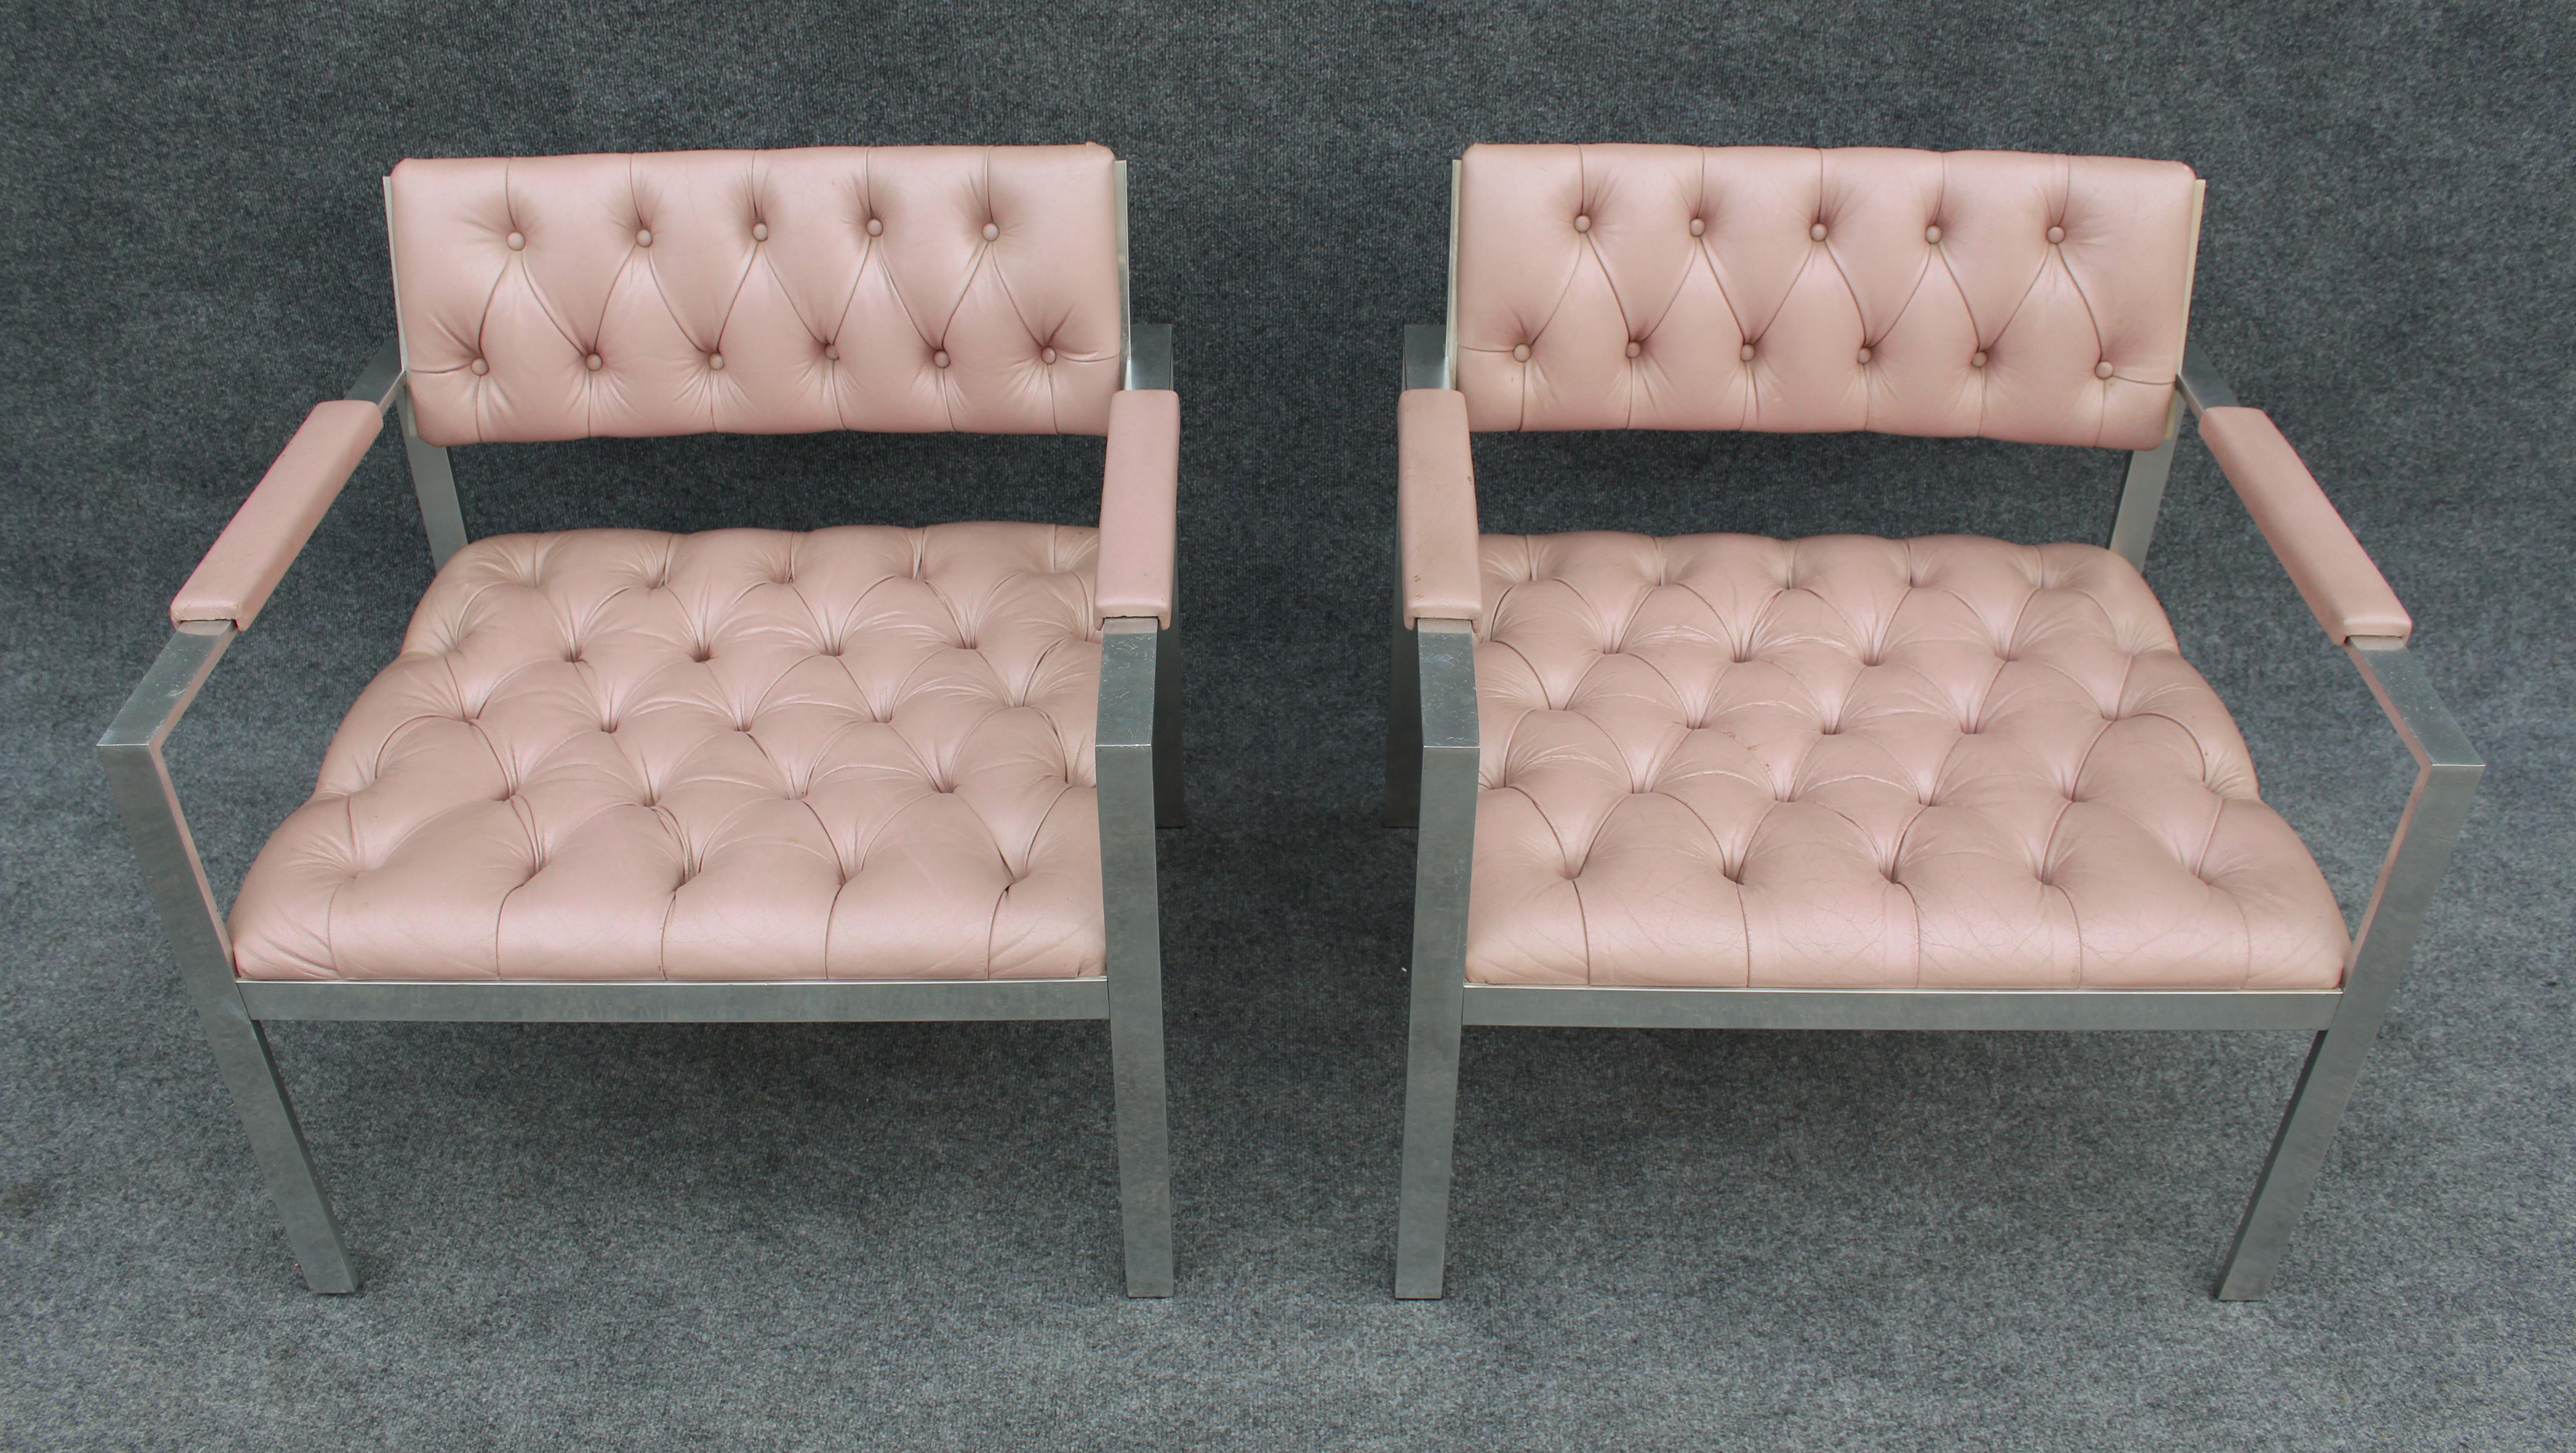 Pair of Rare Harvey Probber Polished Aluminum & Pink Leather Lounge Chairs 1970s For Sale 6